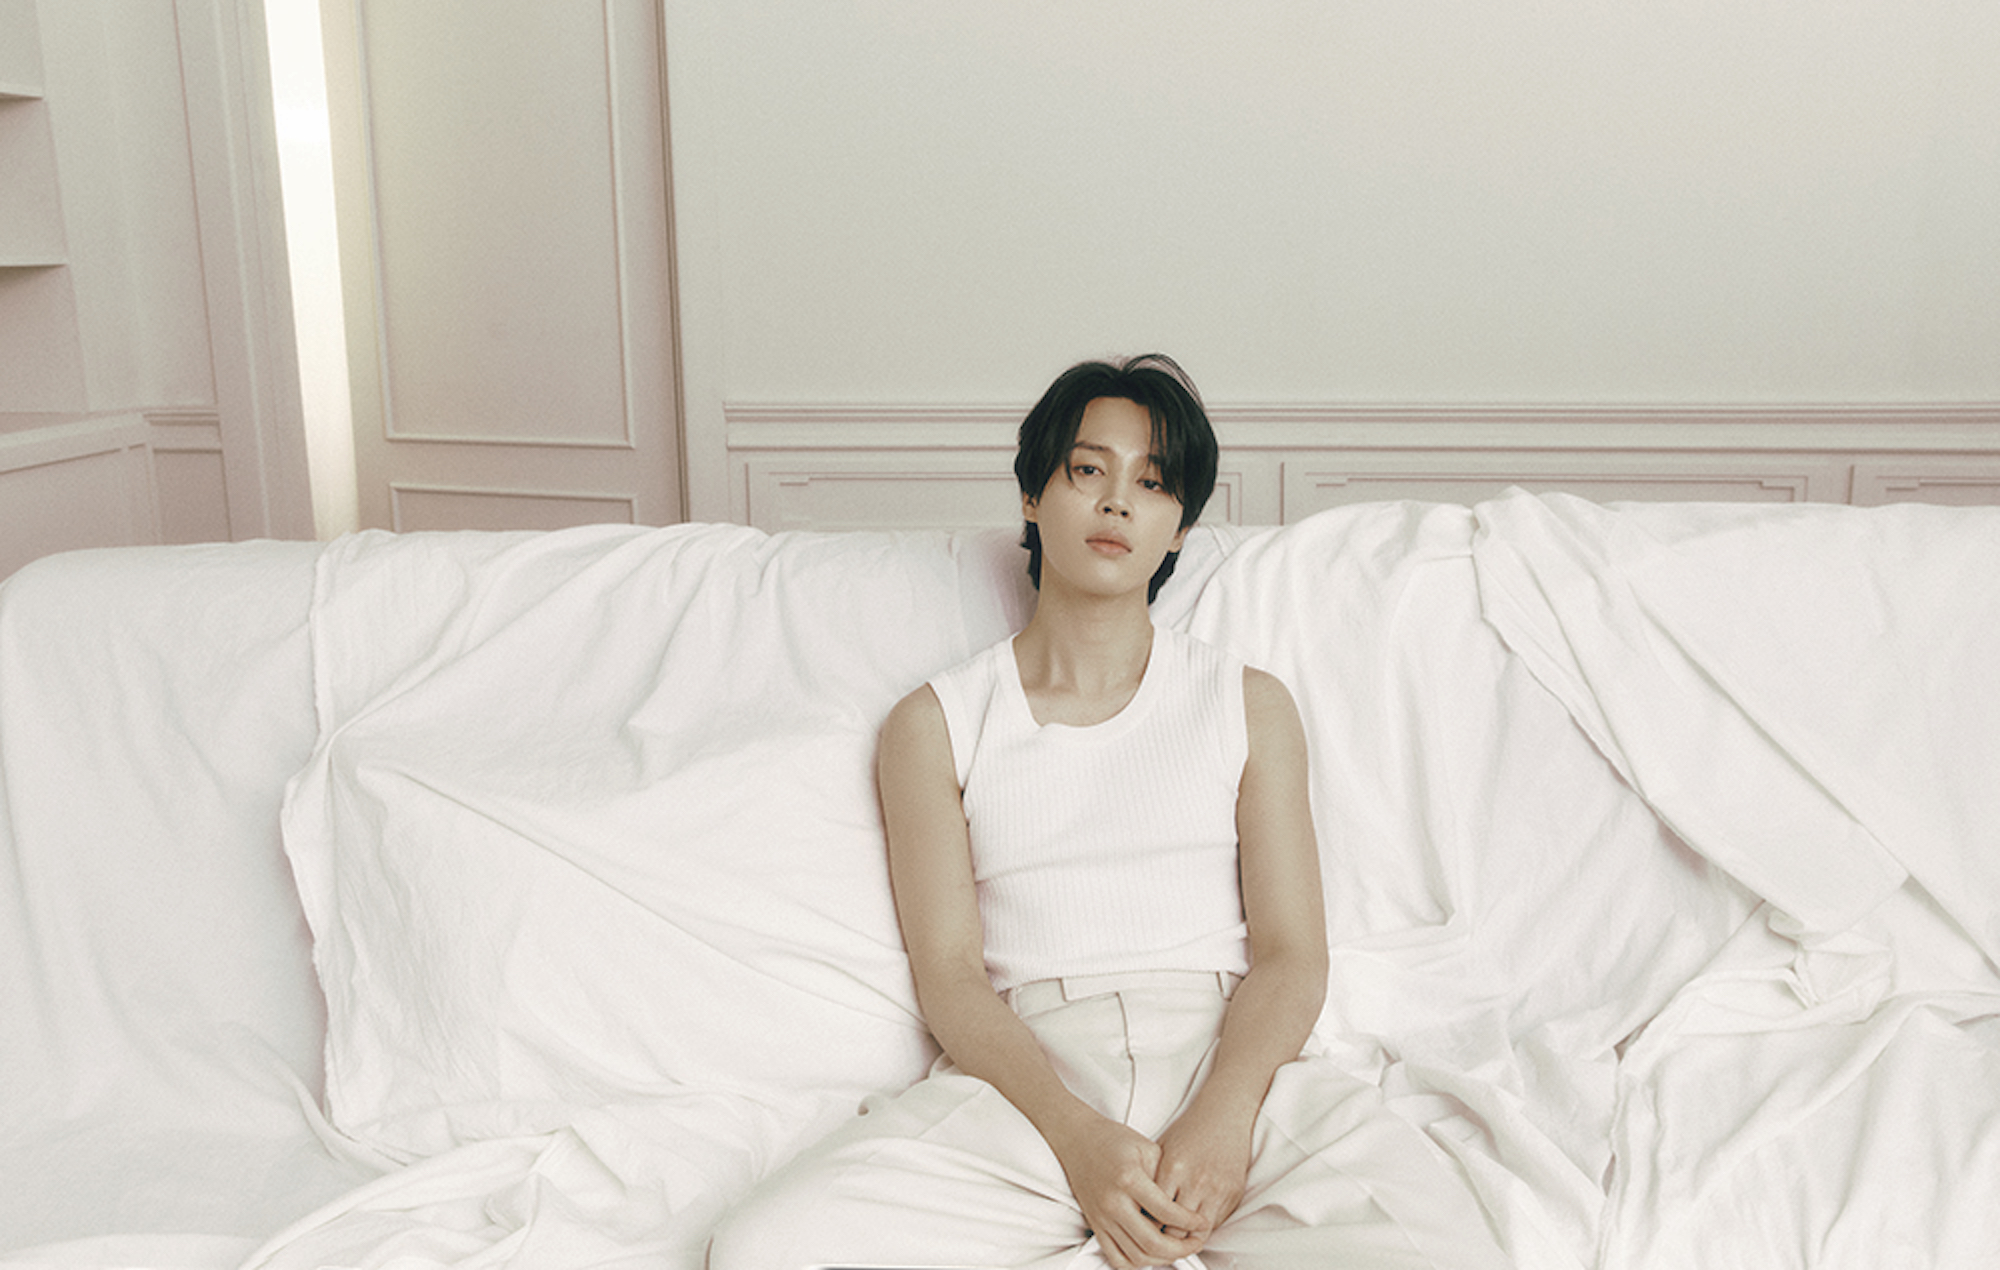 BTS’ Jimin to release vinyl edition of debut solo record ‘FACE’